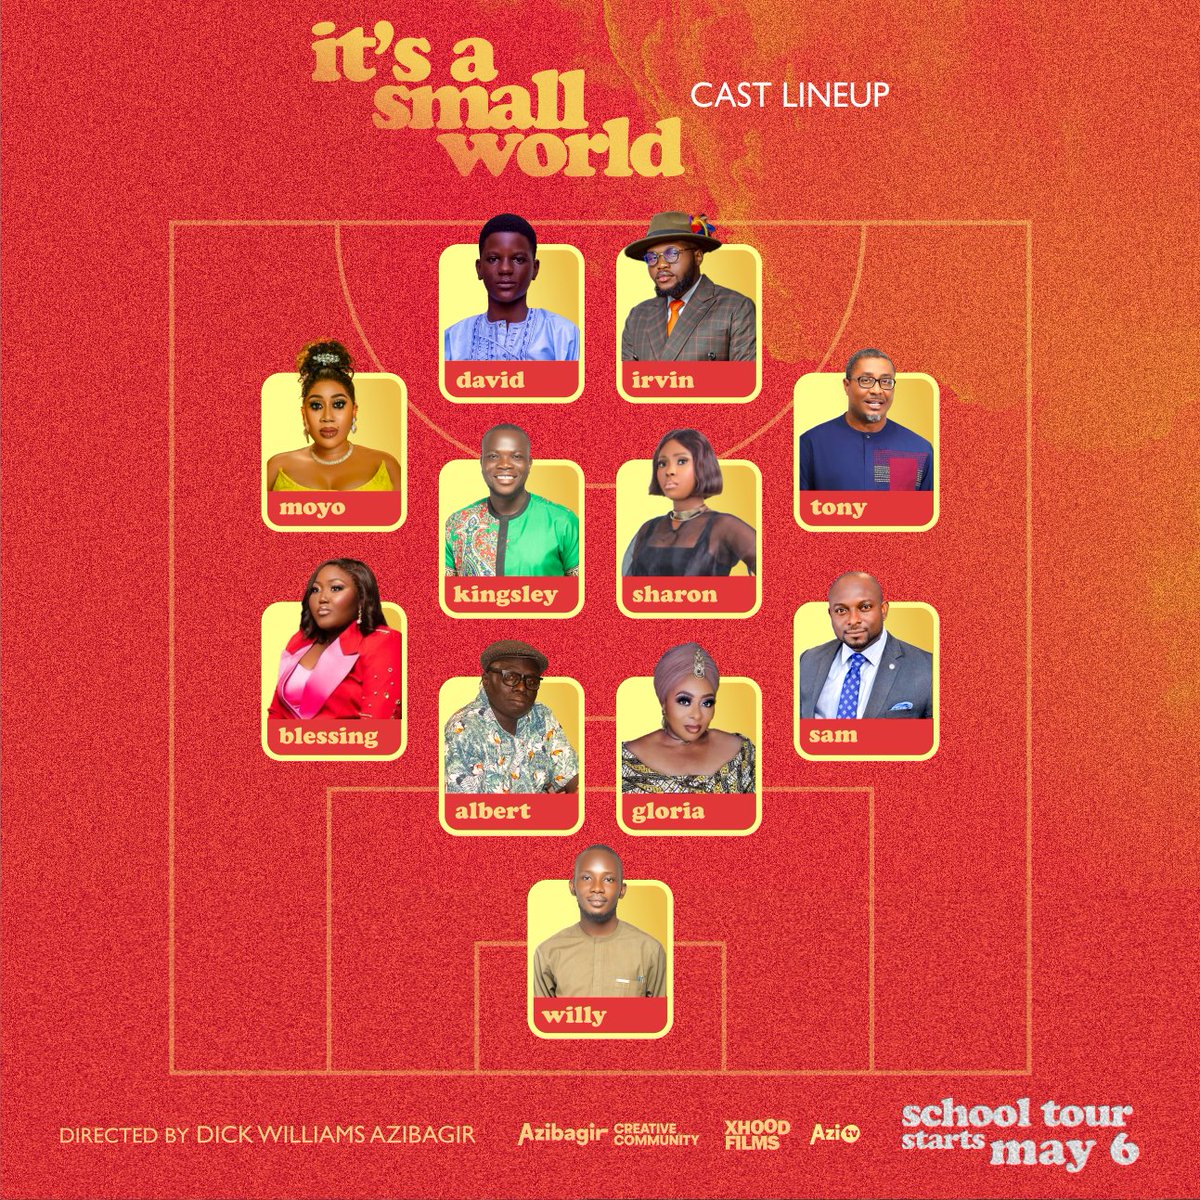 Cast Line Up (Official Poster 2)
What’s that taboo society shy away from talking about? IT’S A SMALL WORLD (boy child molestation story) talks about it all.
SCHOOL TOUR STARTS MAY 6 🚀
#itsasmallworldthemovie #nollywood #boychild #Coachella